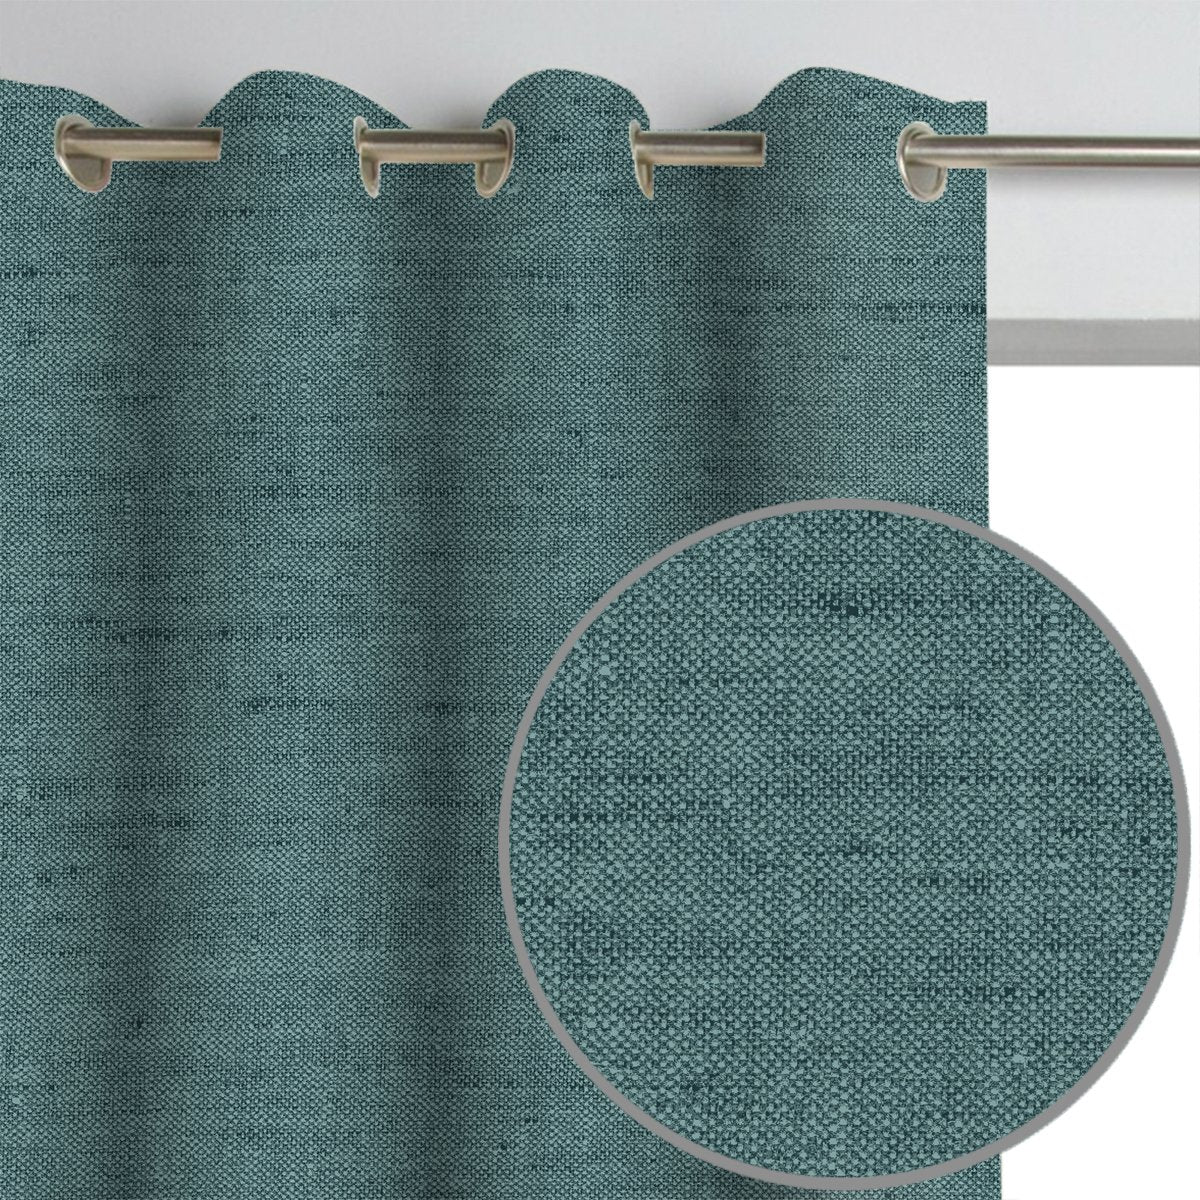 Gemma Linen Textured Unlined Curtain Panel (Blackout Available)